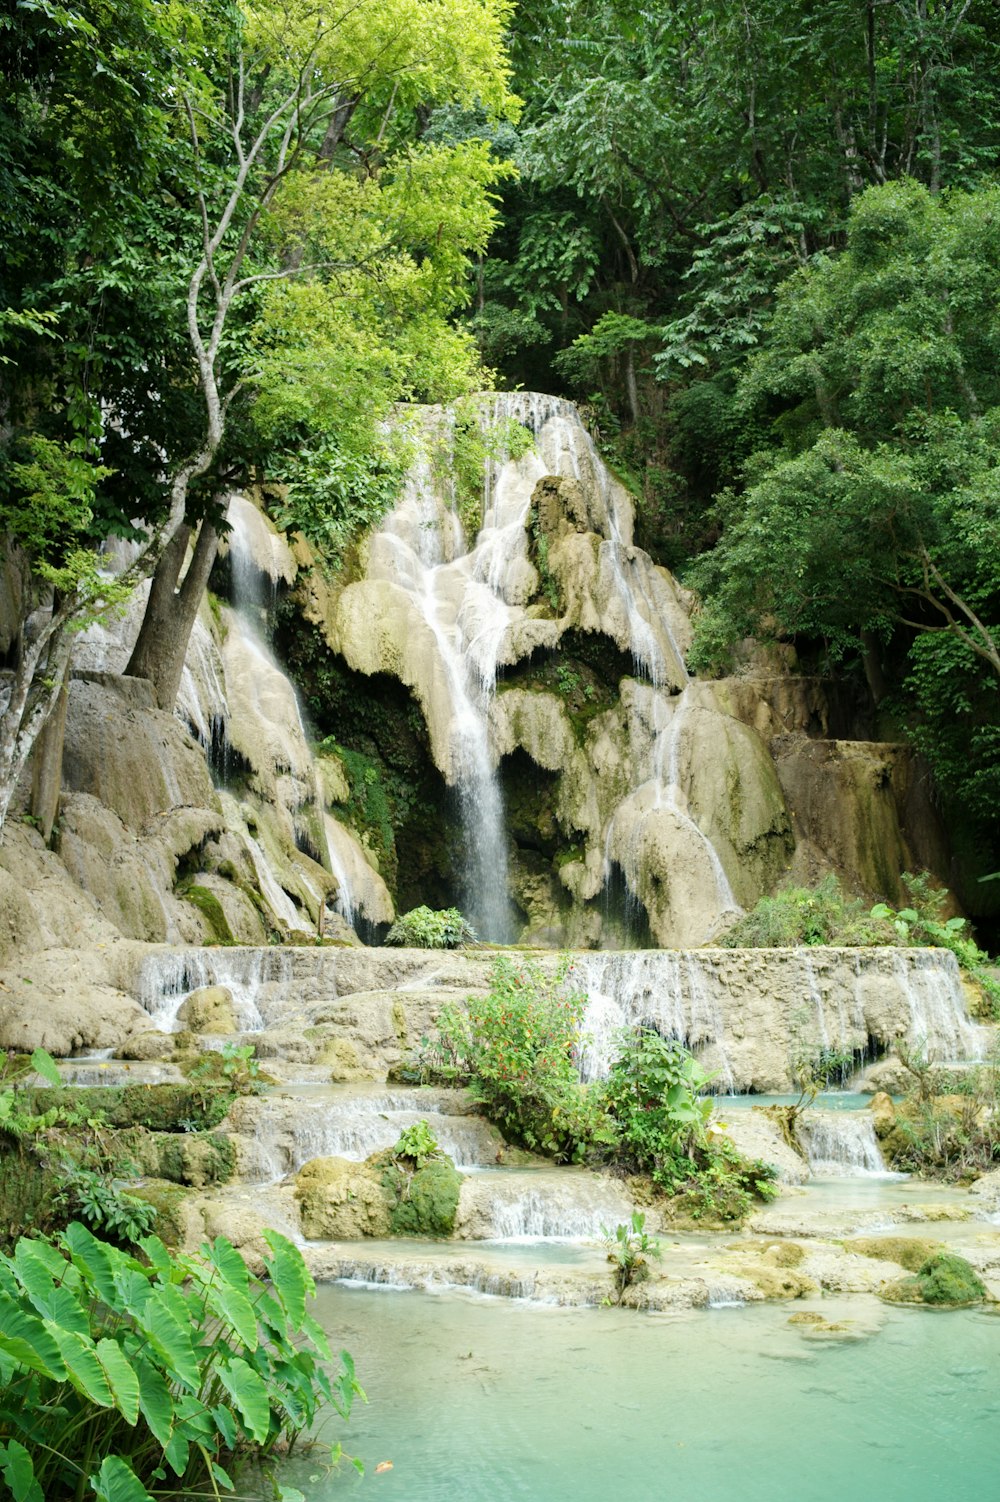 waterfalls surrounded by green trees at daytime